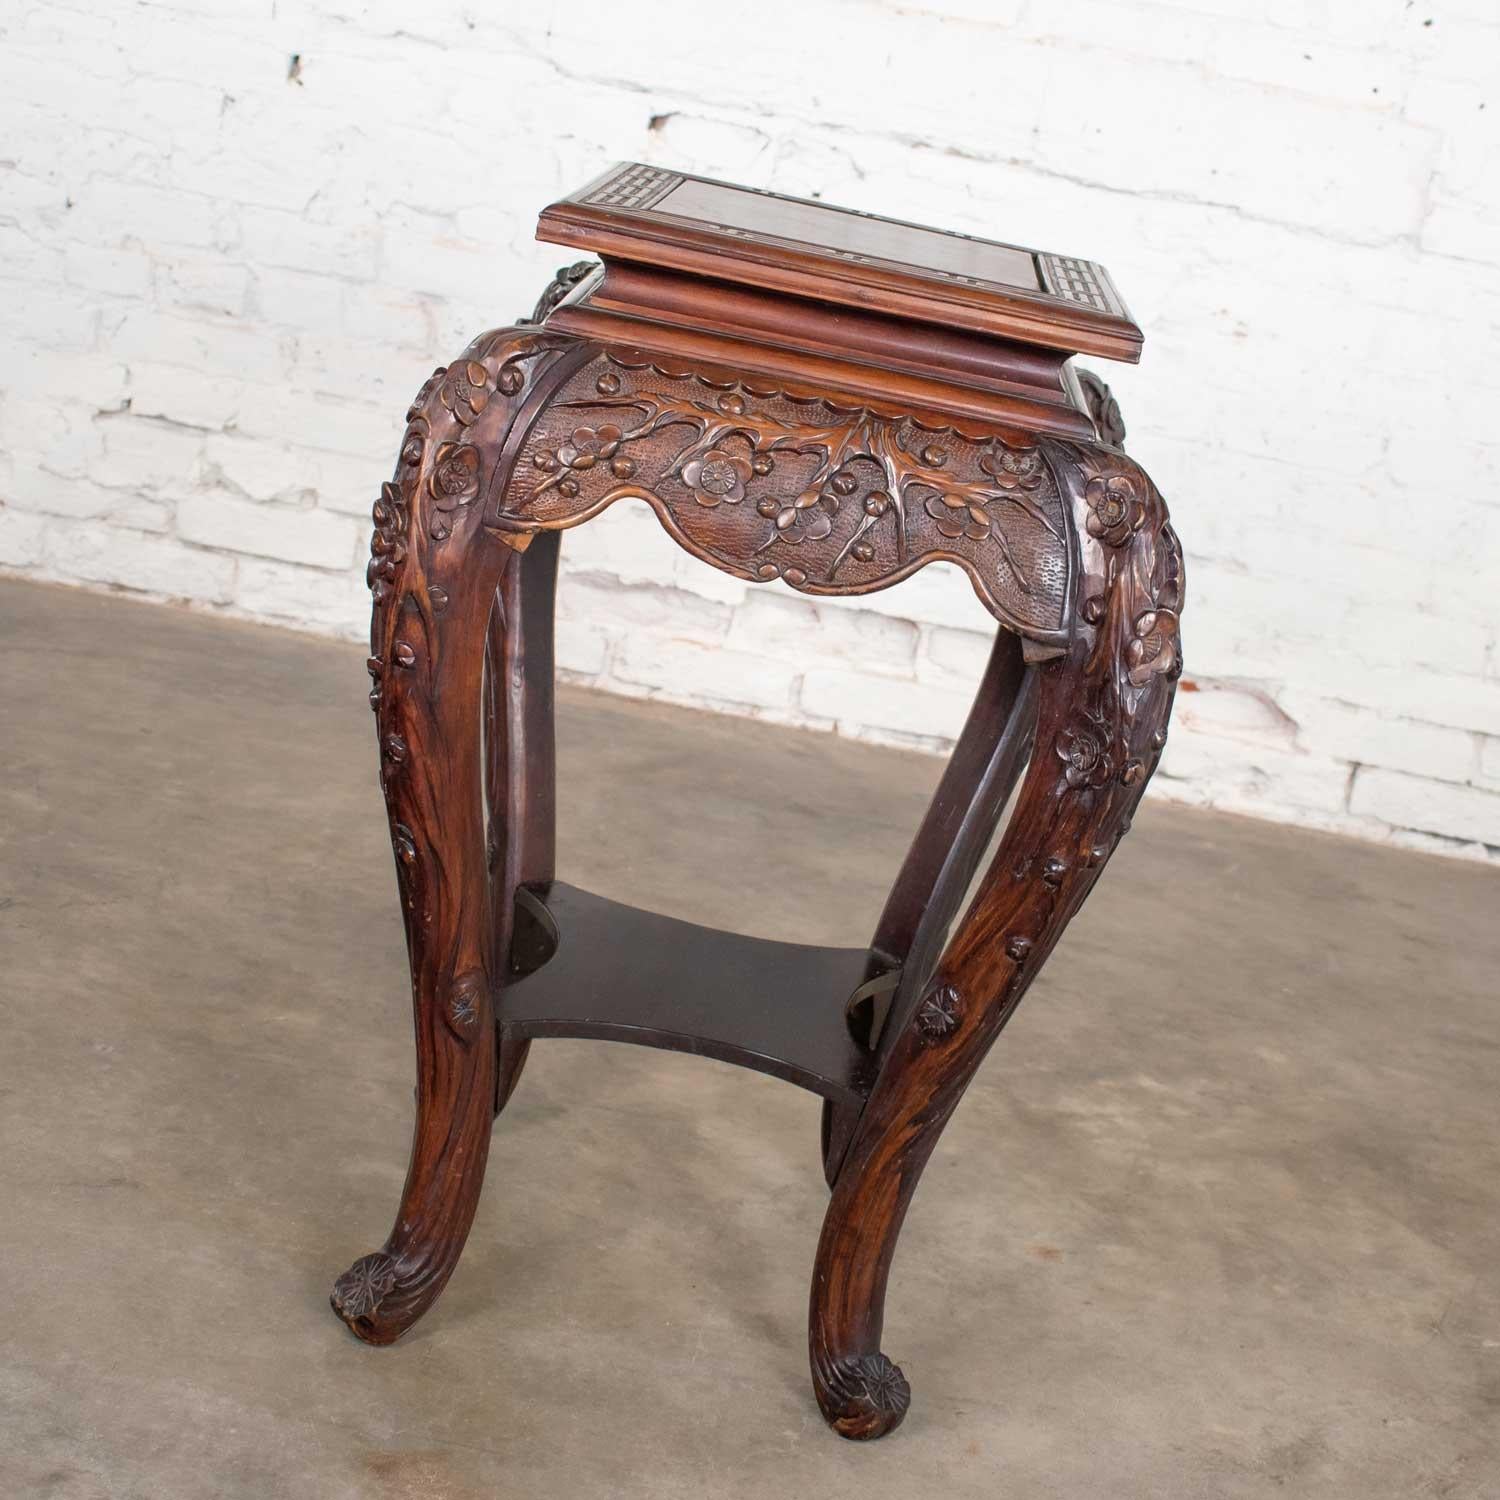 Hand-Carved Antique Asian Pedestal Table Rosewood Color Hand Carved Cherry Blossoms